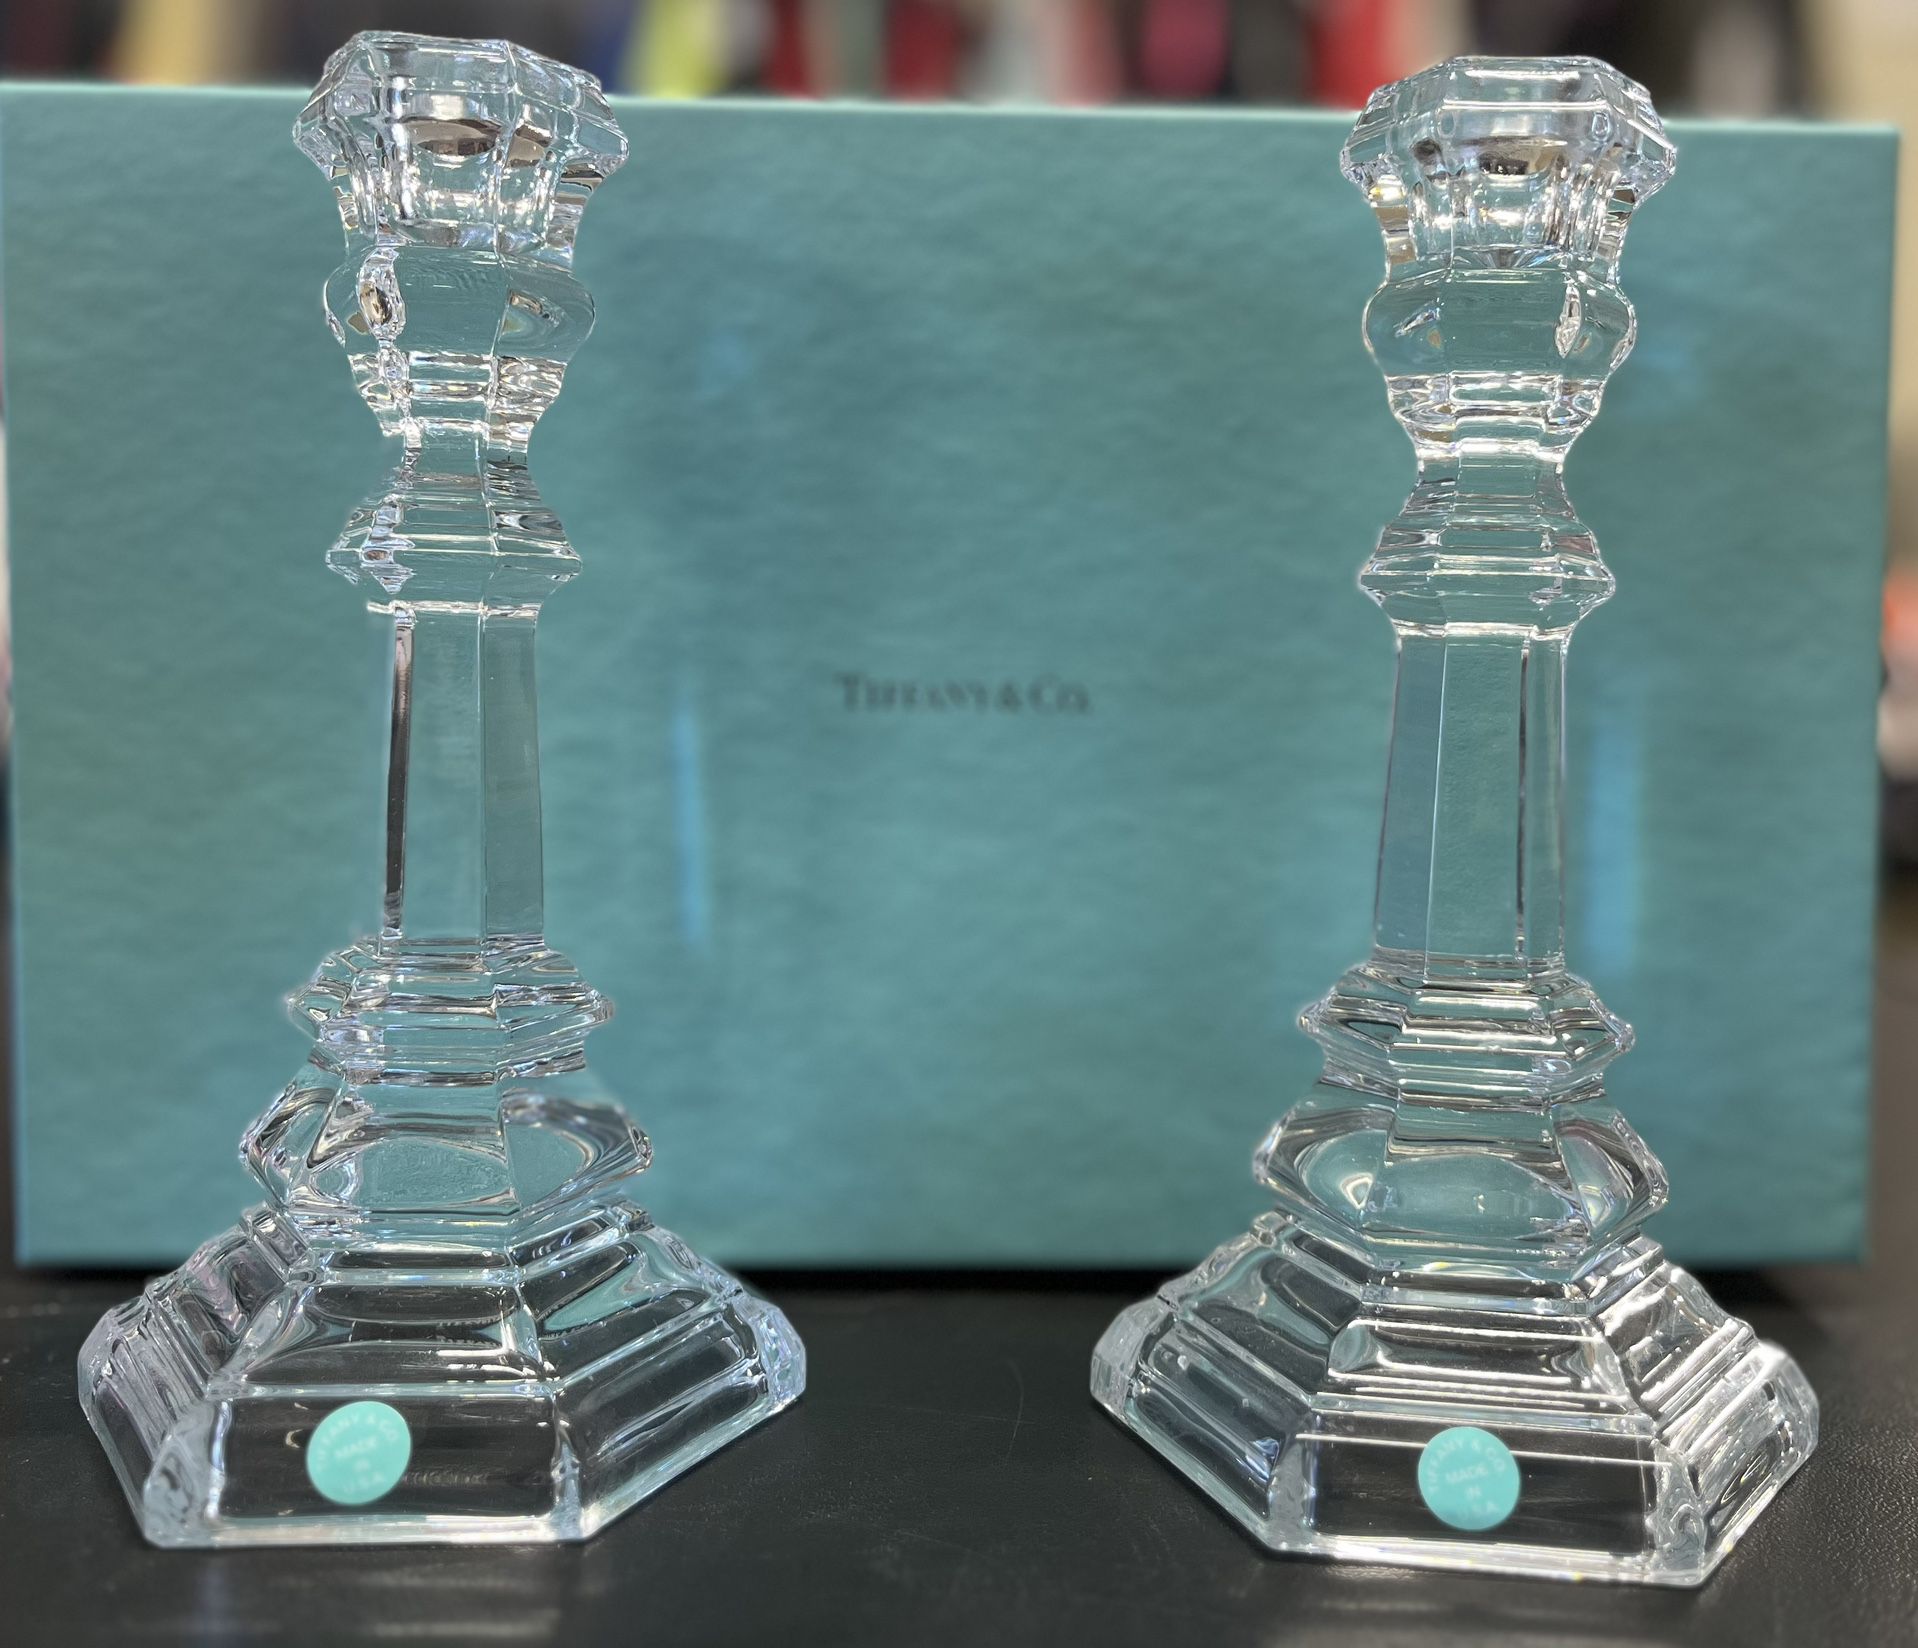 NEW Tiffany & CO Crystal Candlesticks (pair)